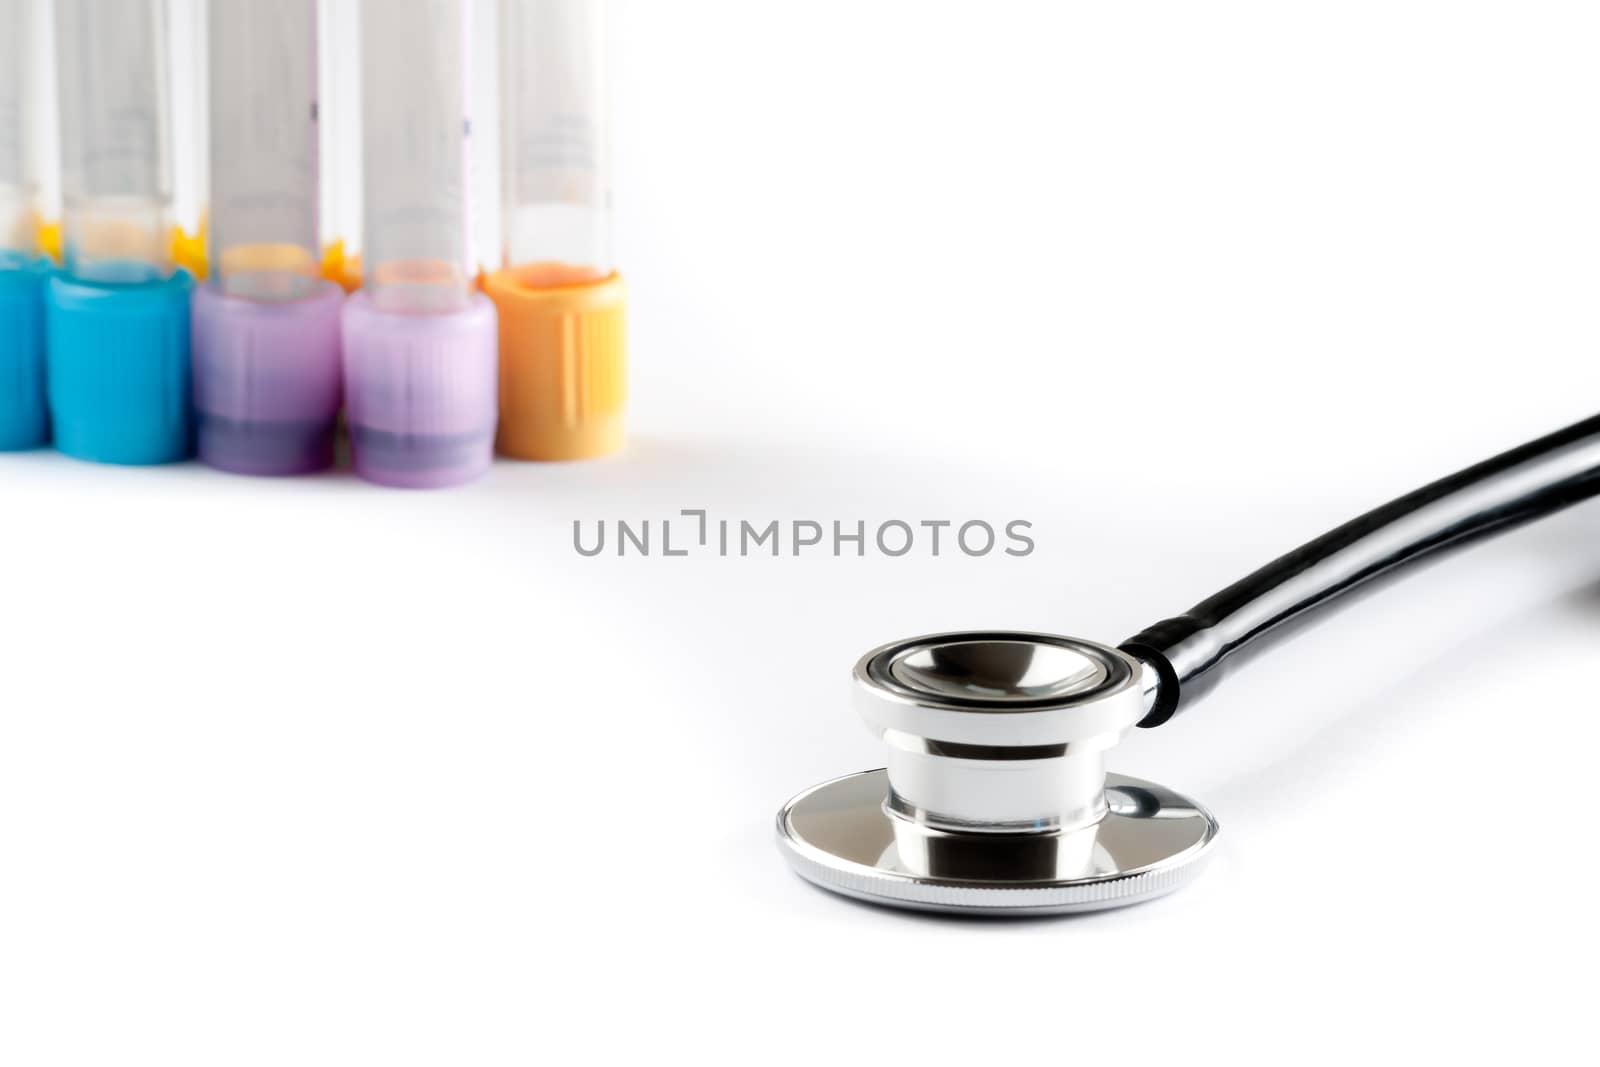 stethoscope in front of the test tubes in laboratory on white background with space for text